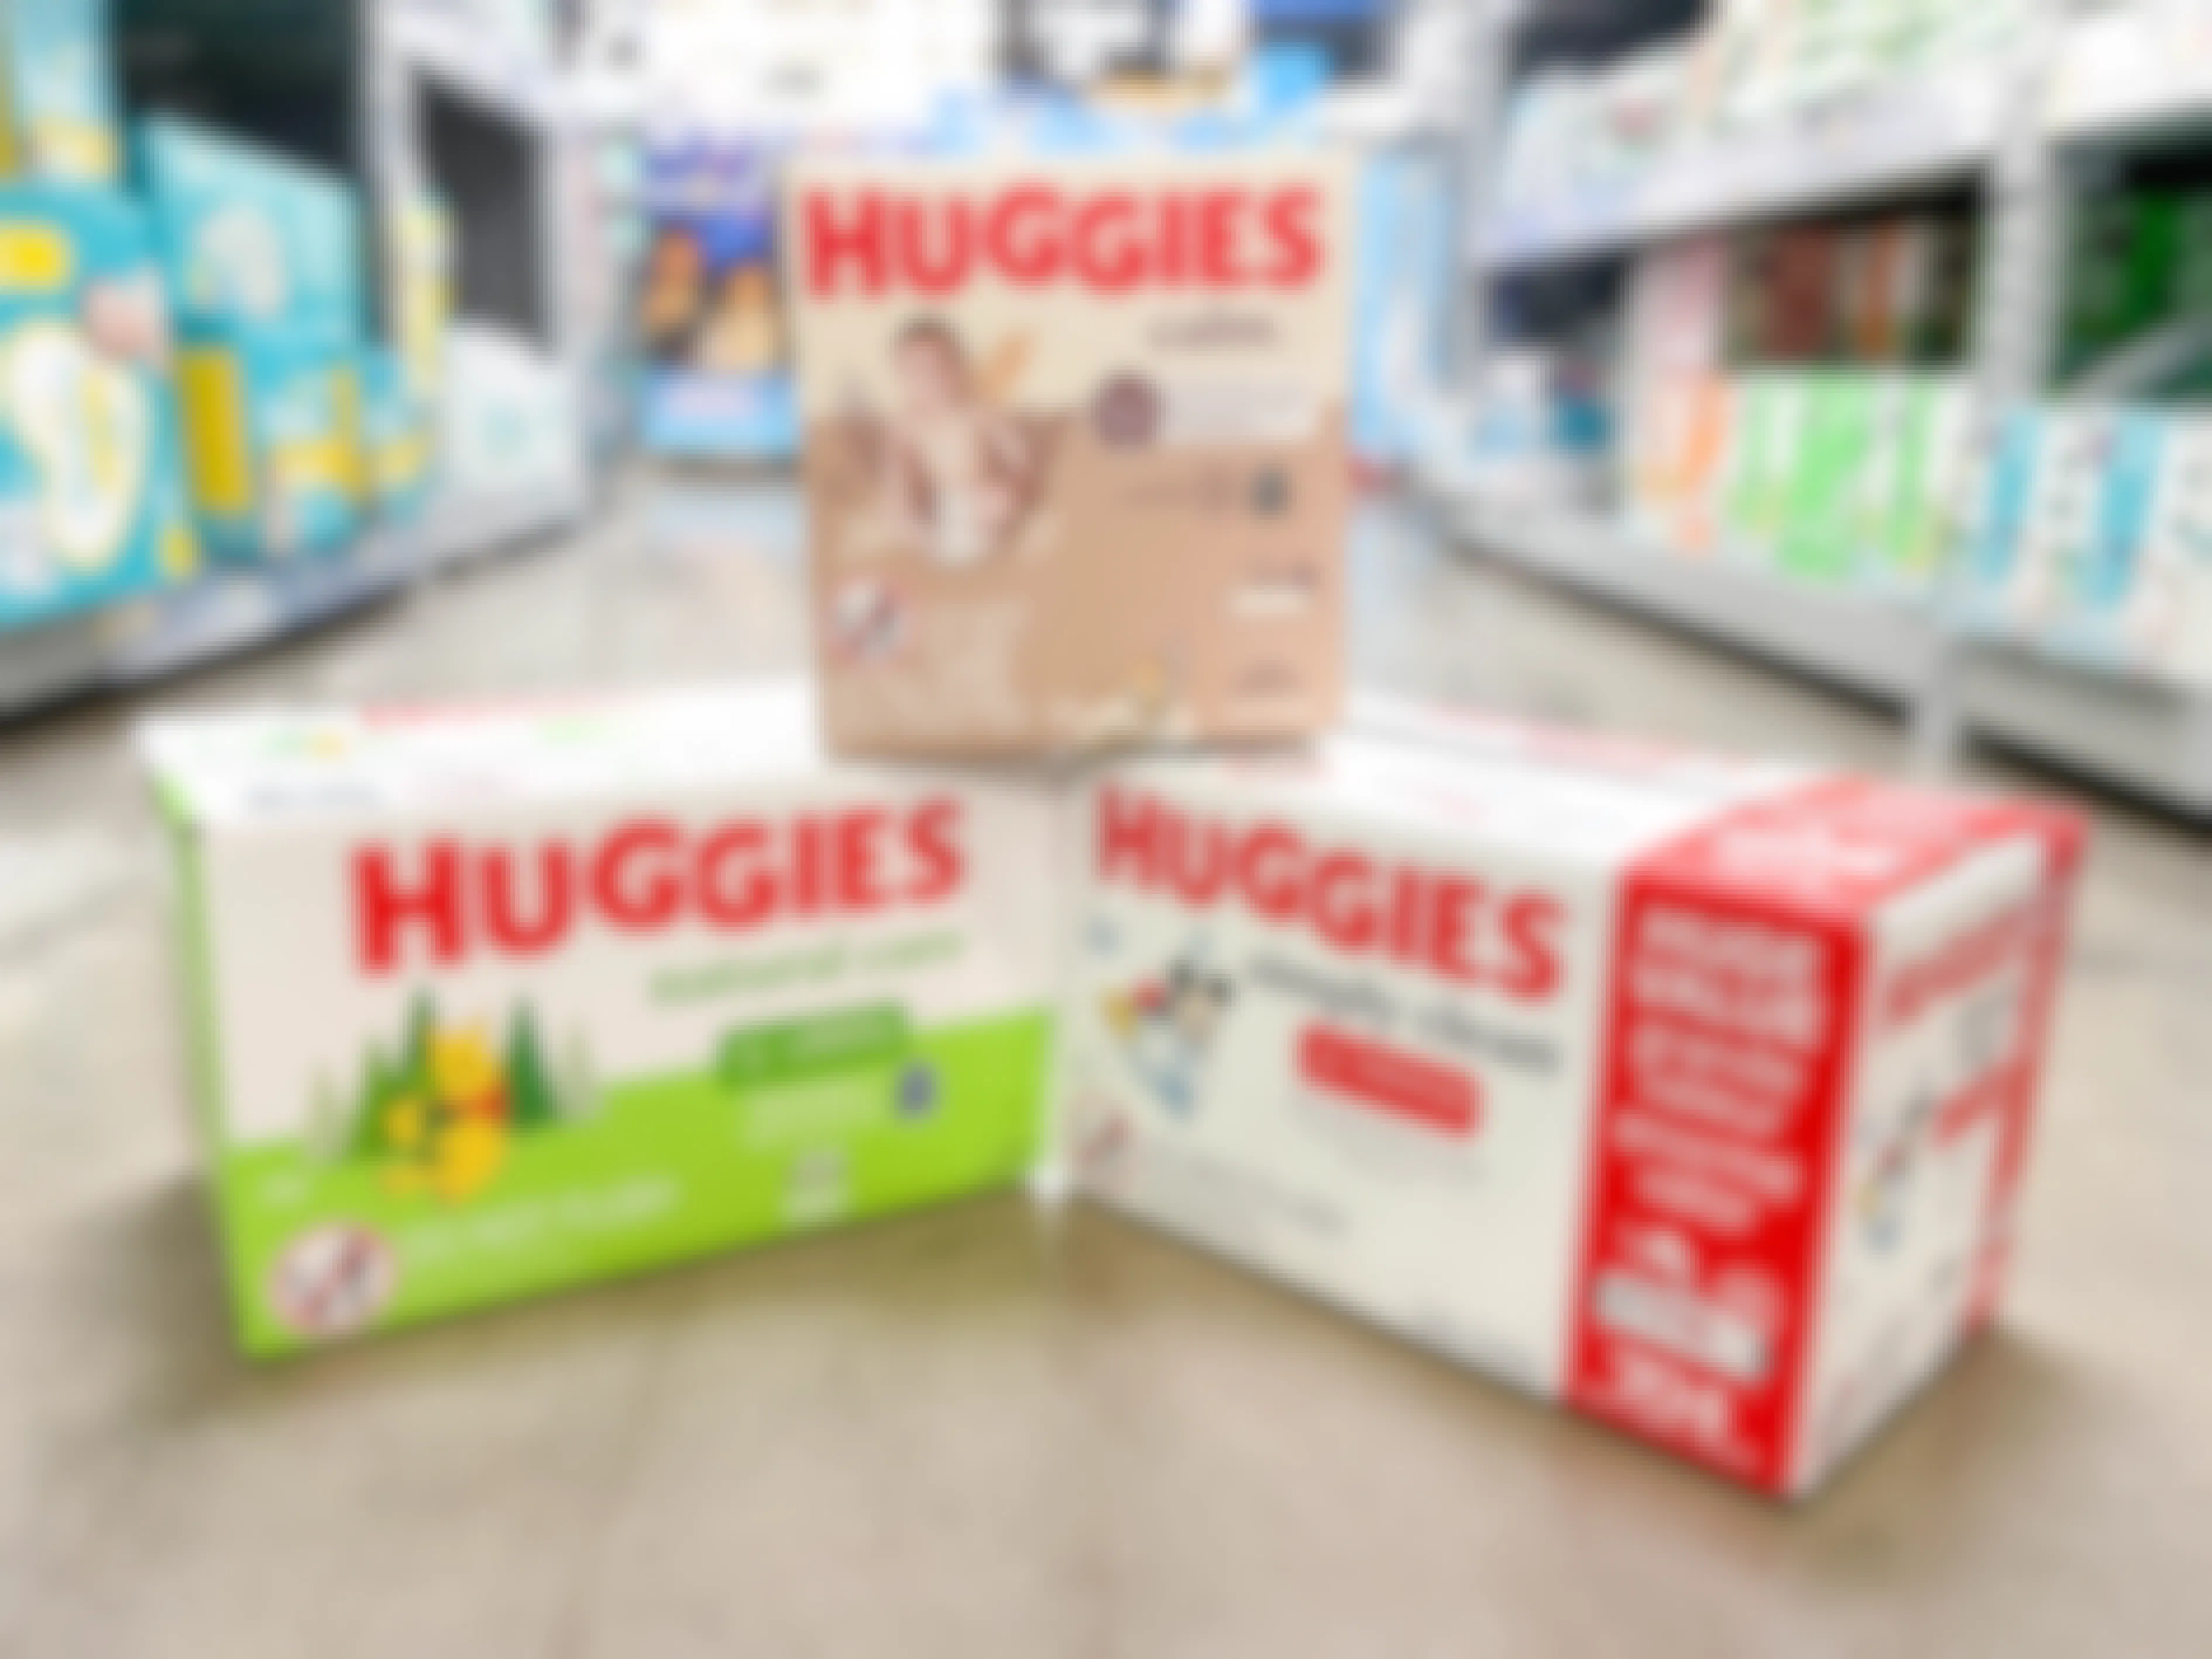 threee boxes of huggies wipes stacked in store